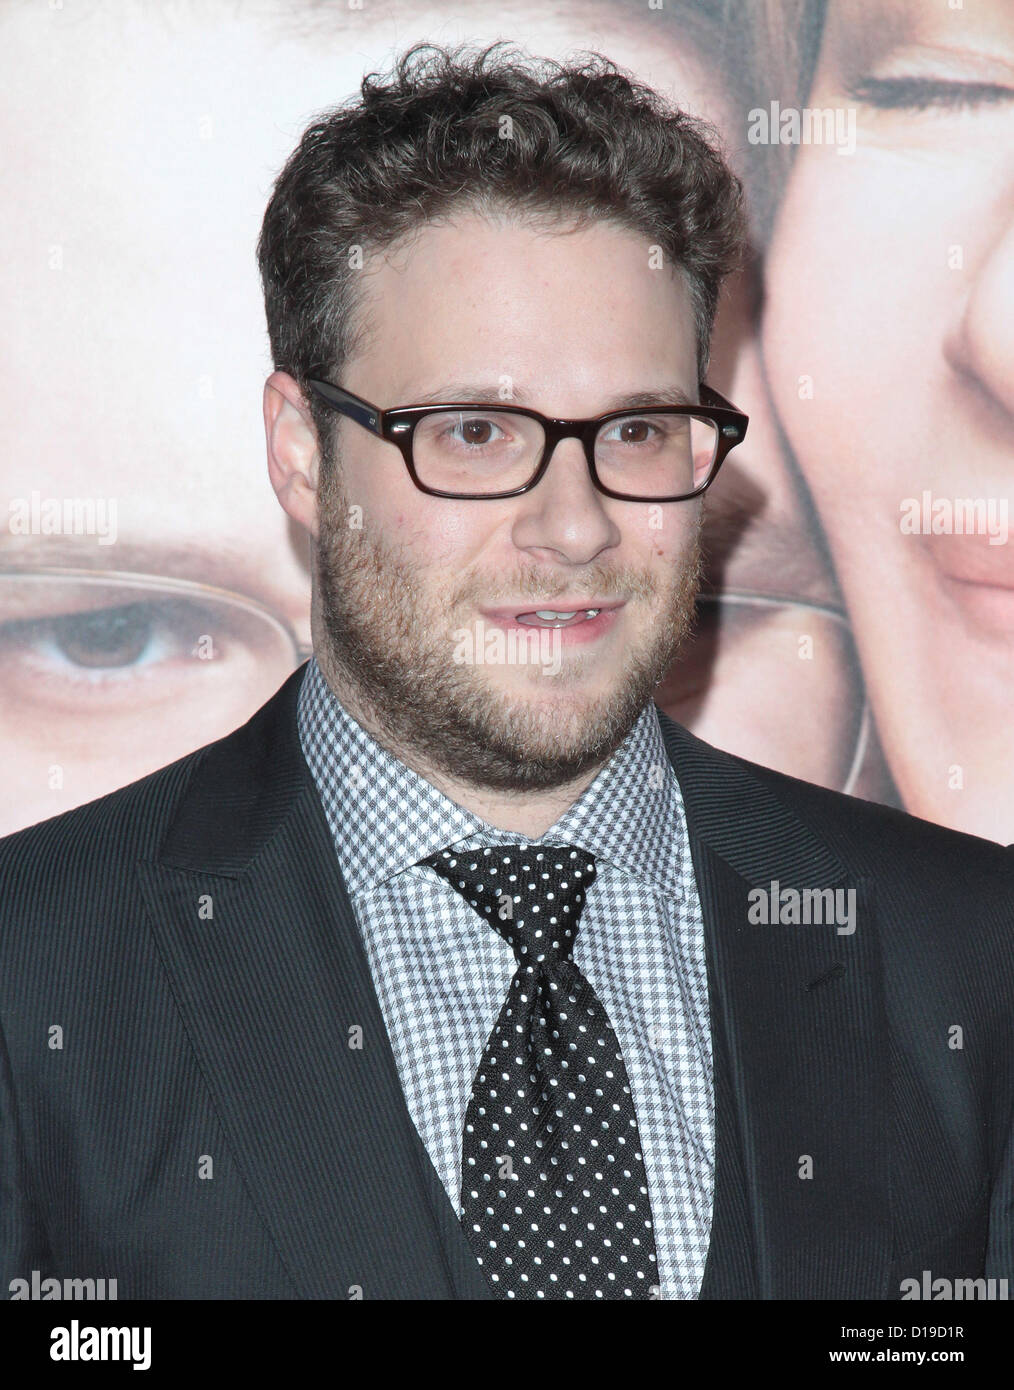 SETH ROGEN LOS ANGELES PREMIERE OF THE GUILT TRIP WESTWOOD CALIFORNIA USA 11 December 2012 Stock Photo